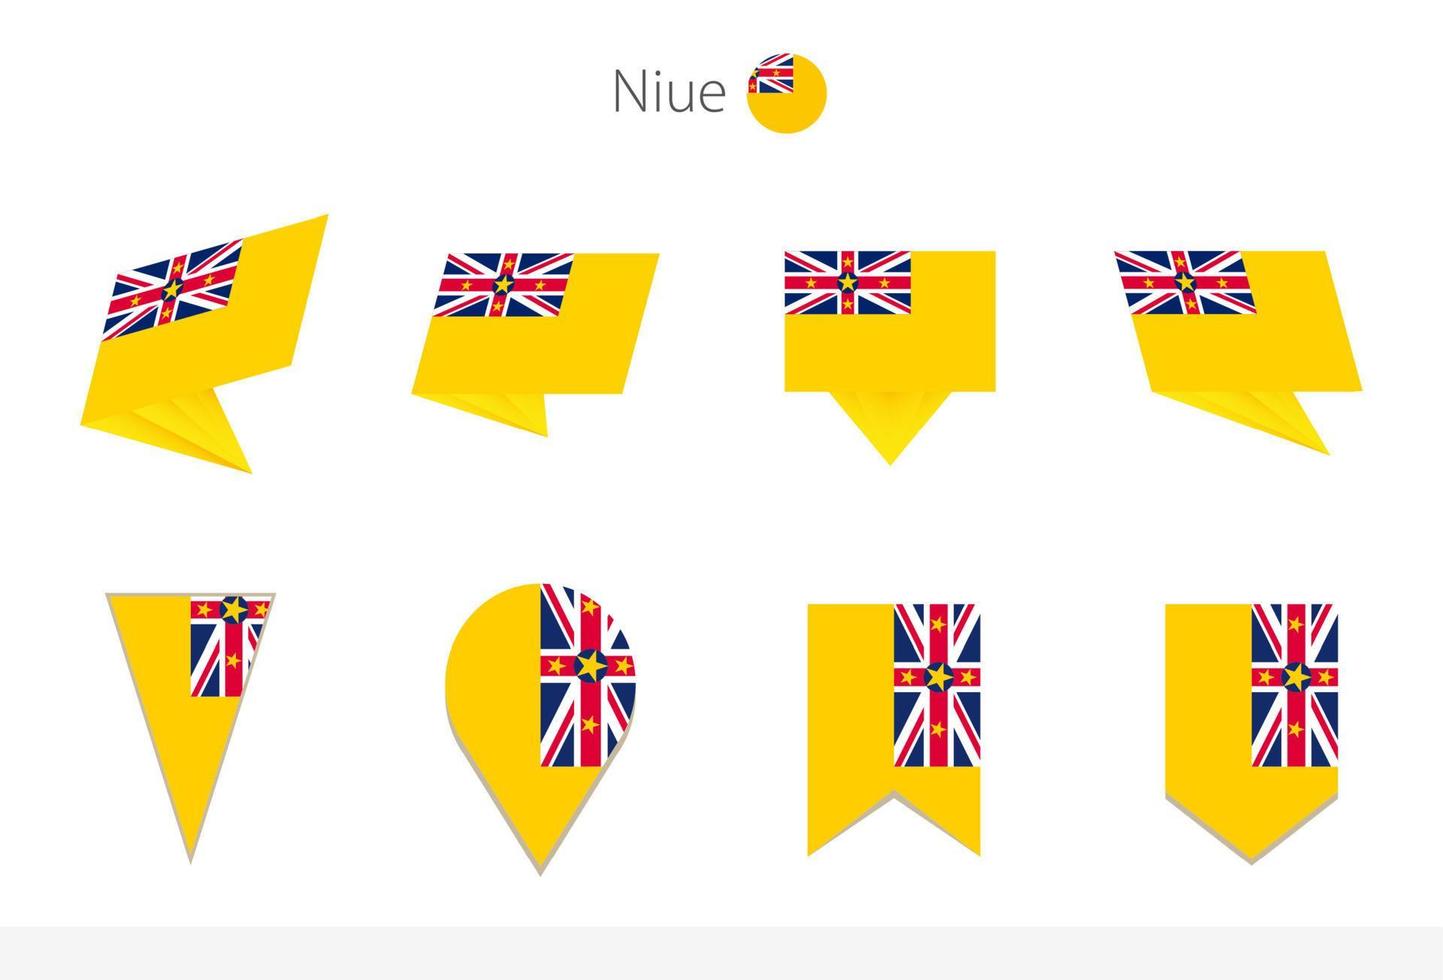 Niue national flag collection, eight versions of Niue vector flags.